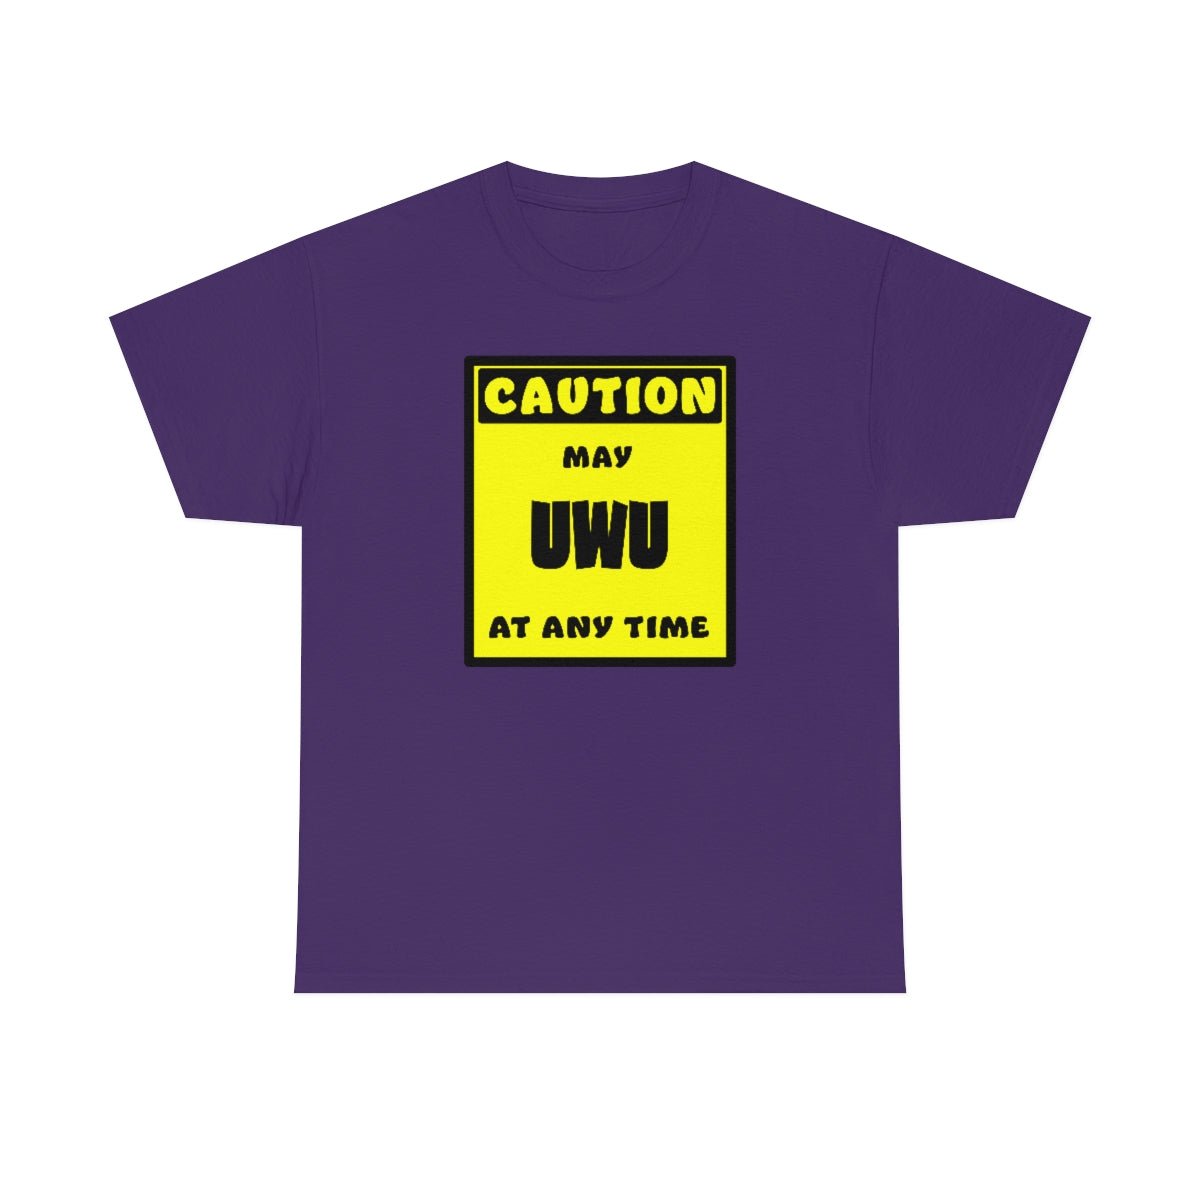 CAUTION! May UWU at any time! - T-Shirt T-Shirt AFLT-Whootorca Purple S 